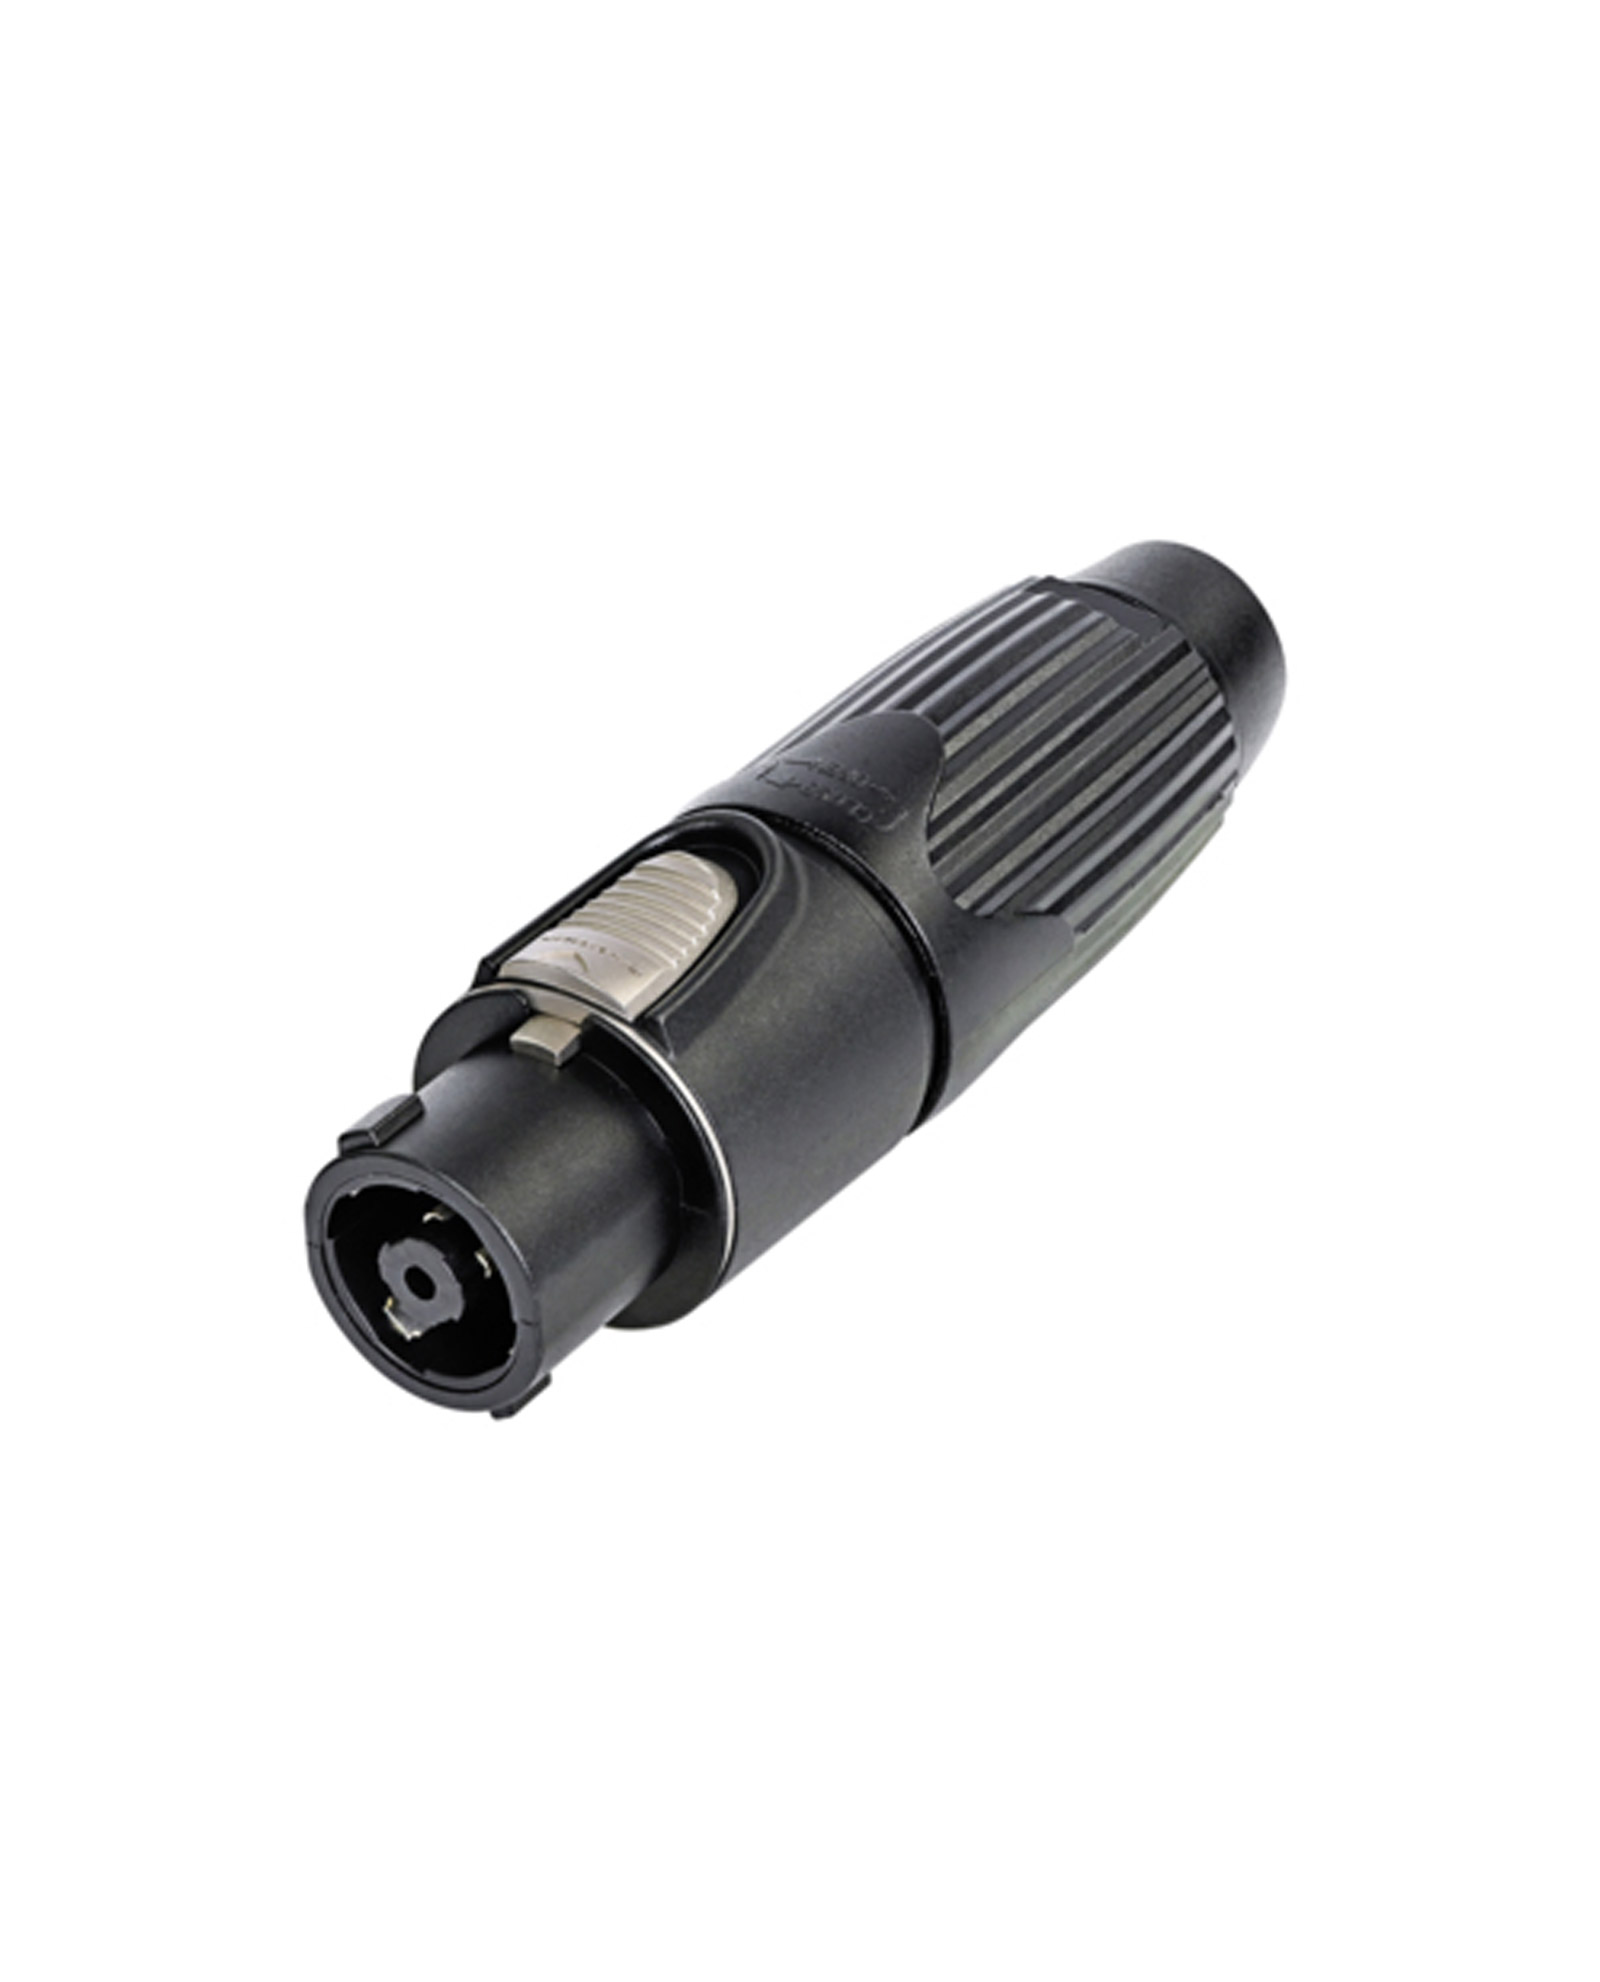 Whirlwind NC3MRX-BAG - Connector - XLR - Neutrik, male inline, right angle,  3 pin, blk/silver